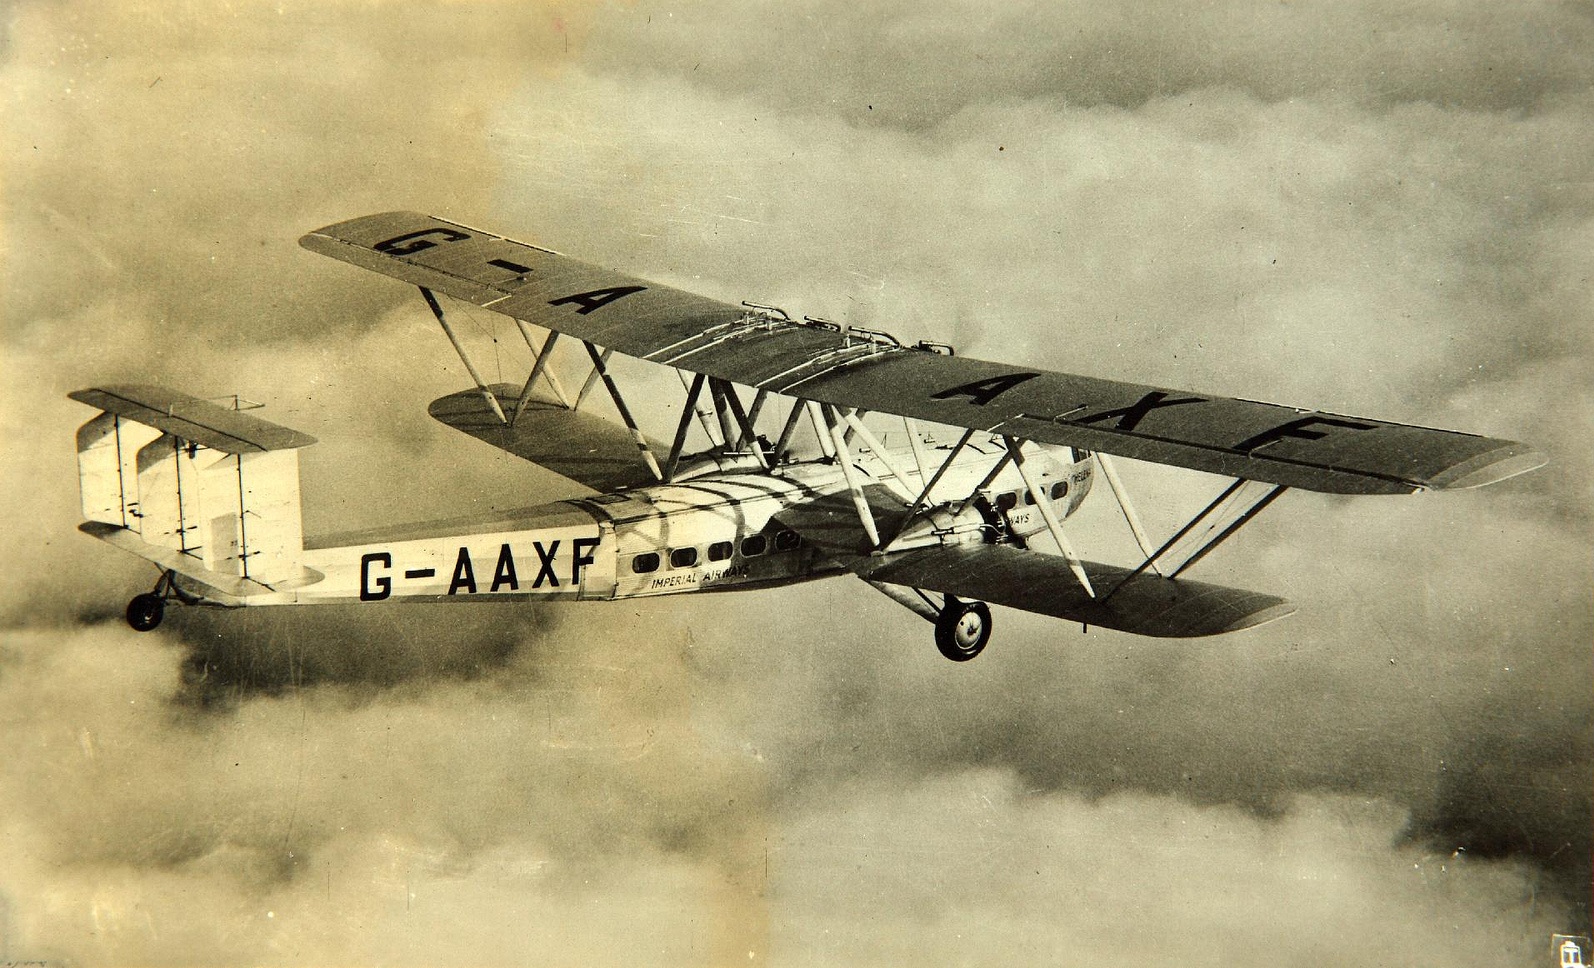 Imperial Airways' Handley Page H.P. 42E, G-AAXF, Helena, in flight. (San Diego Air and Space Museum)